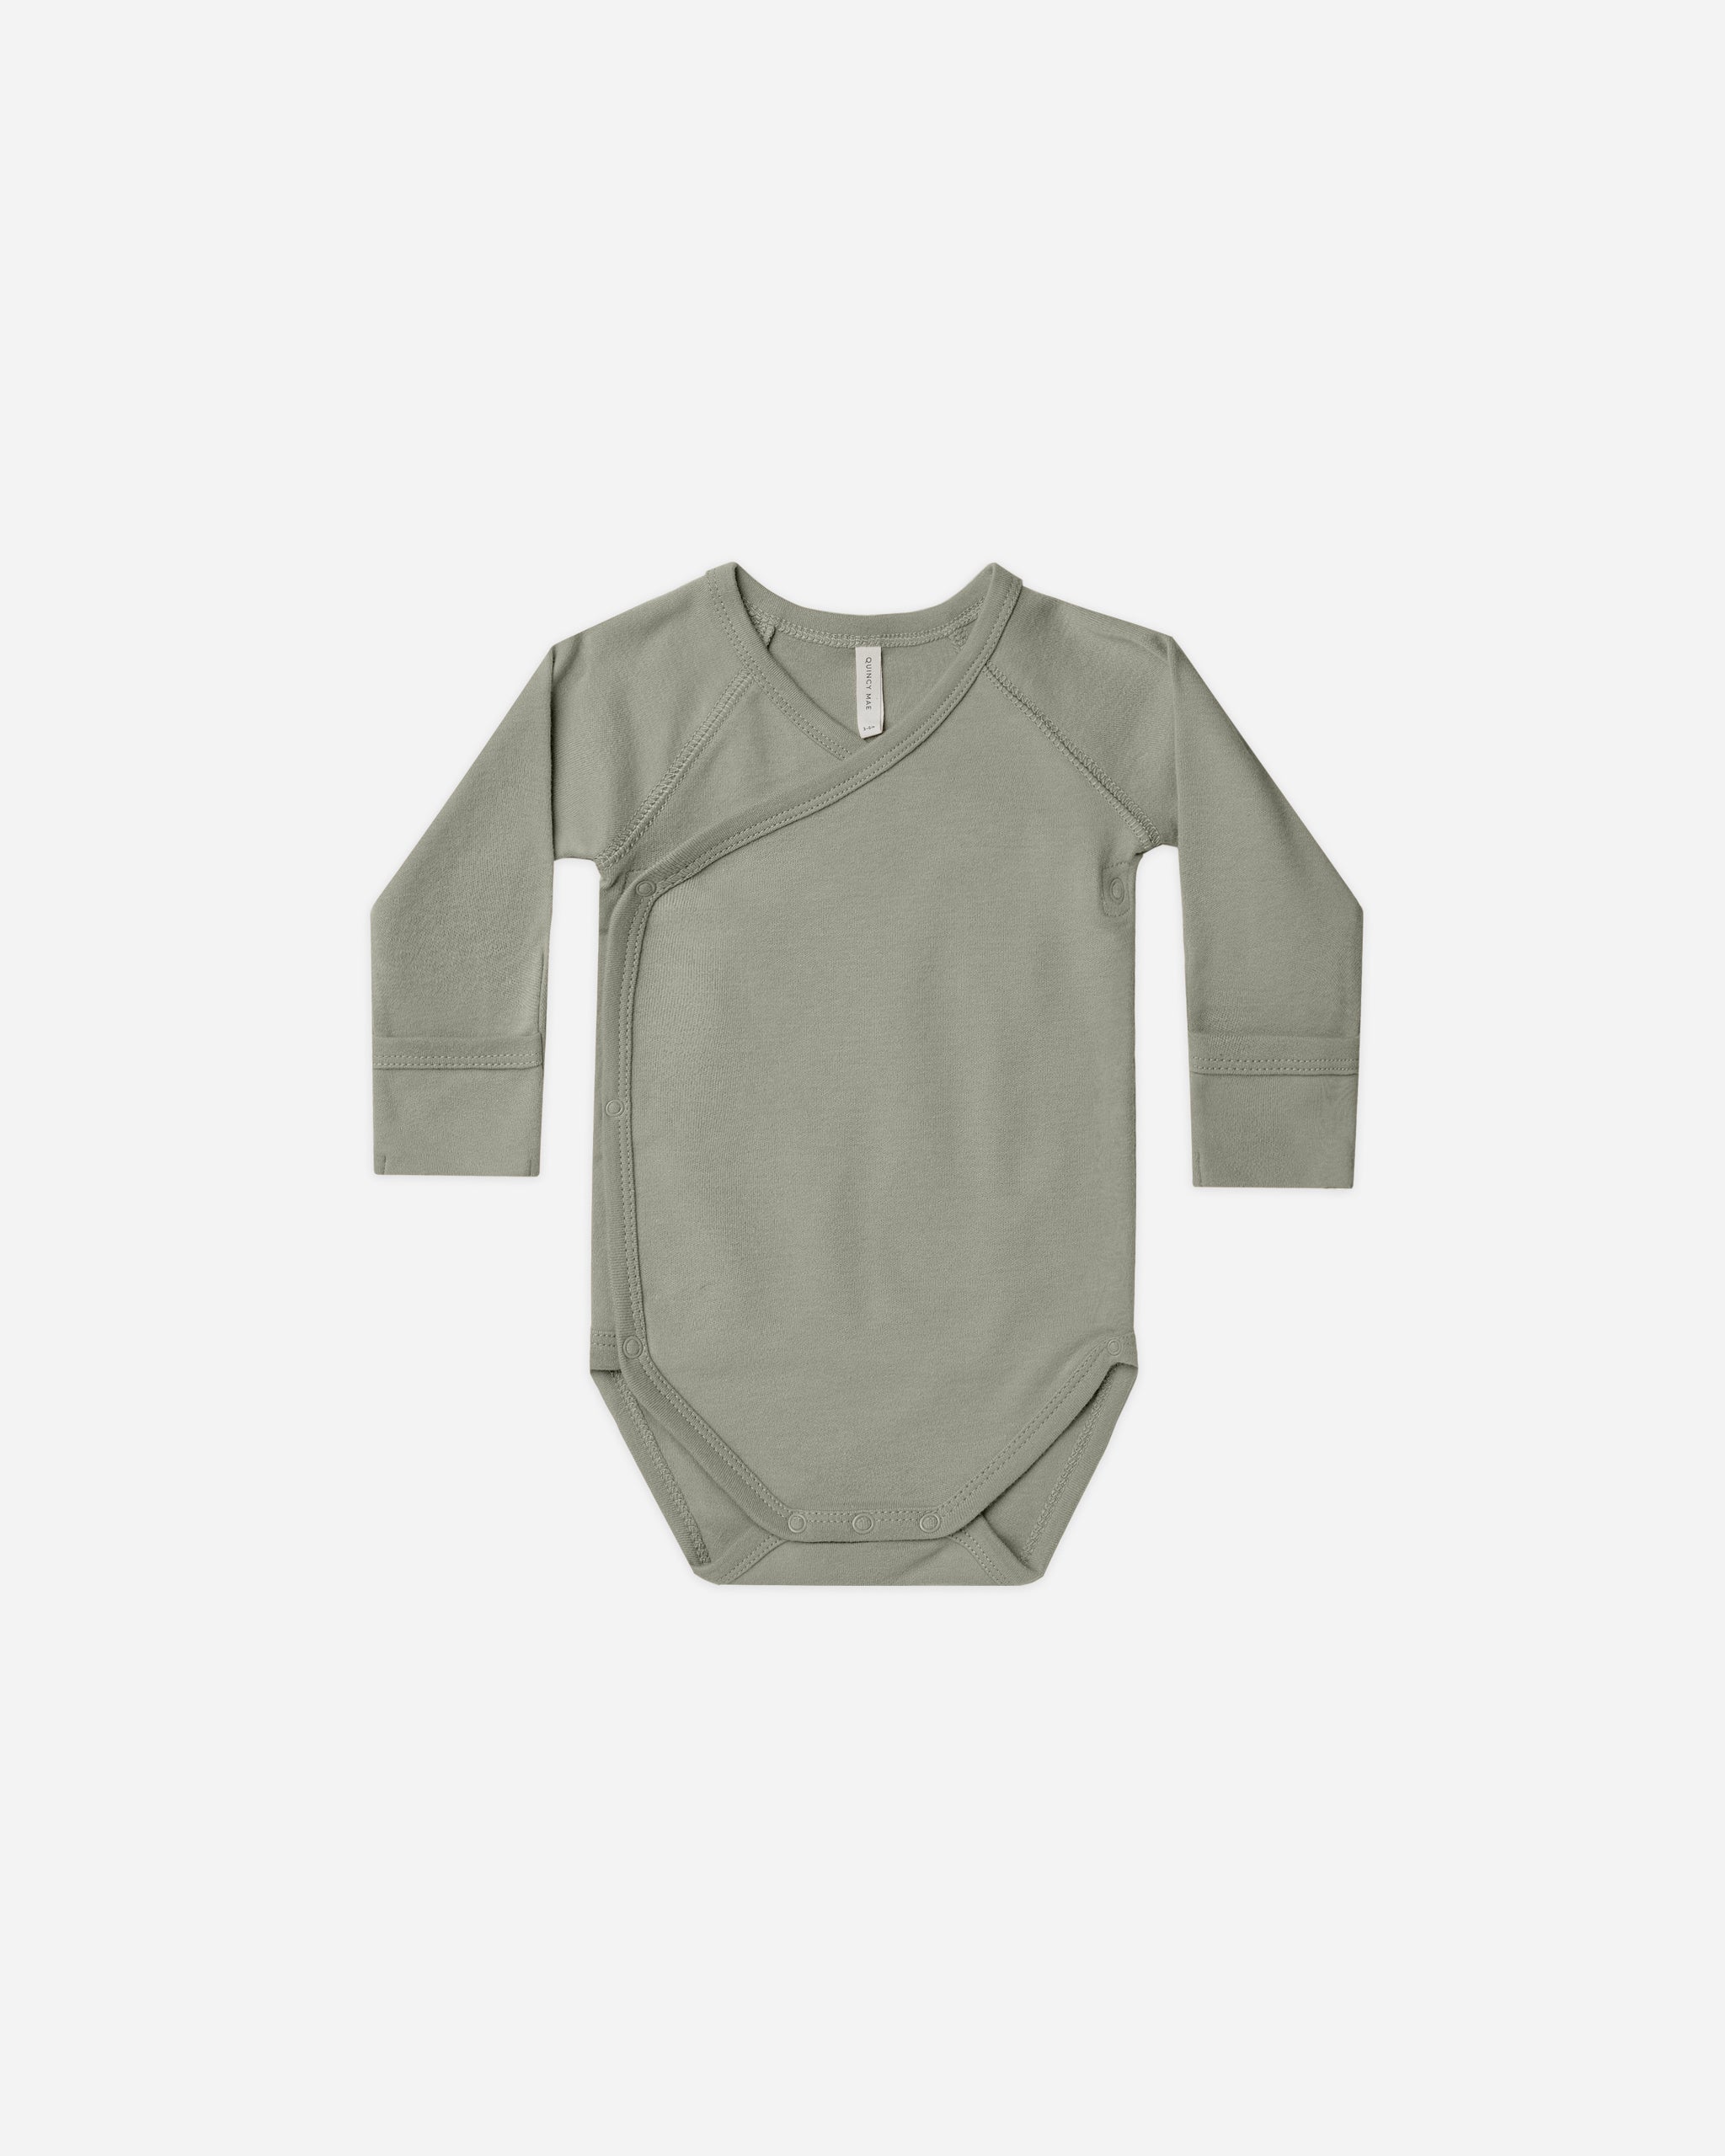 Baby Terry Cloth Long Sleeve Checkered Romper (3-24M) - Sage Green 1-2y(3)